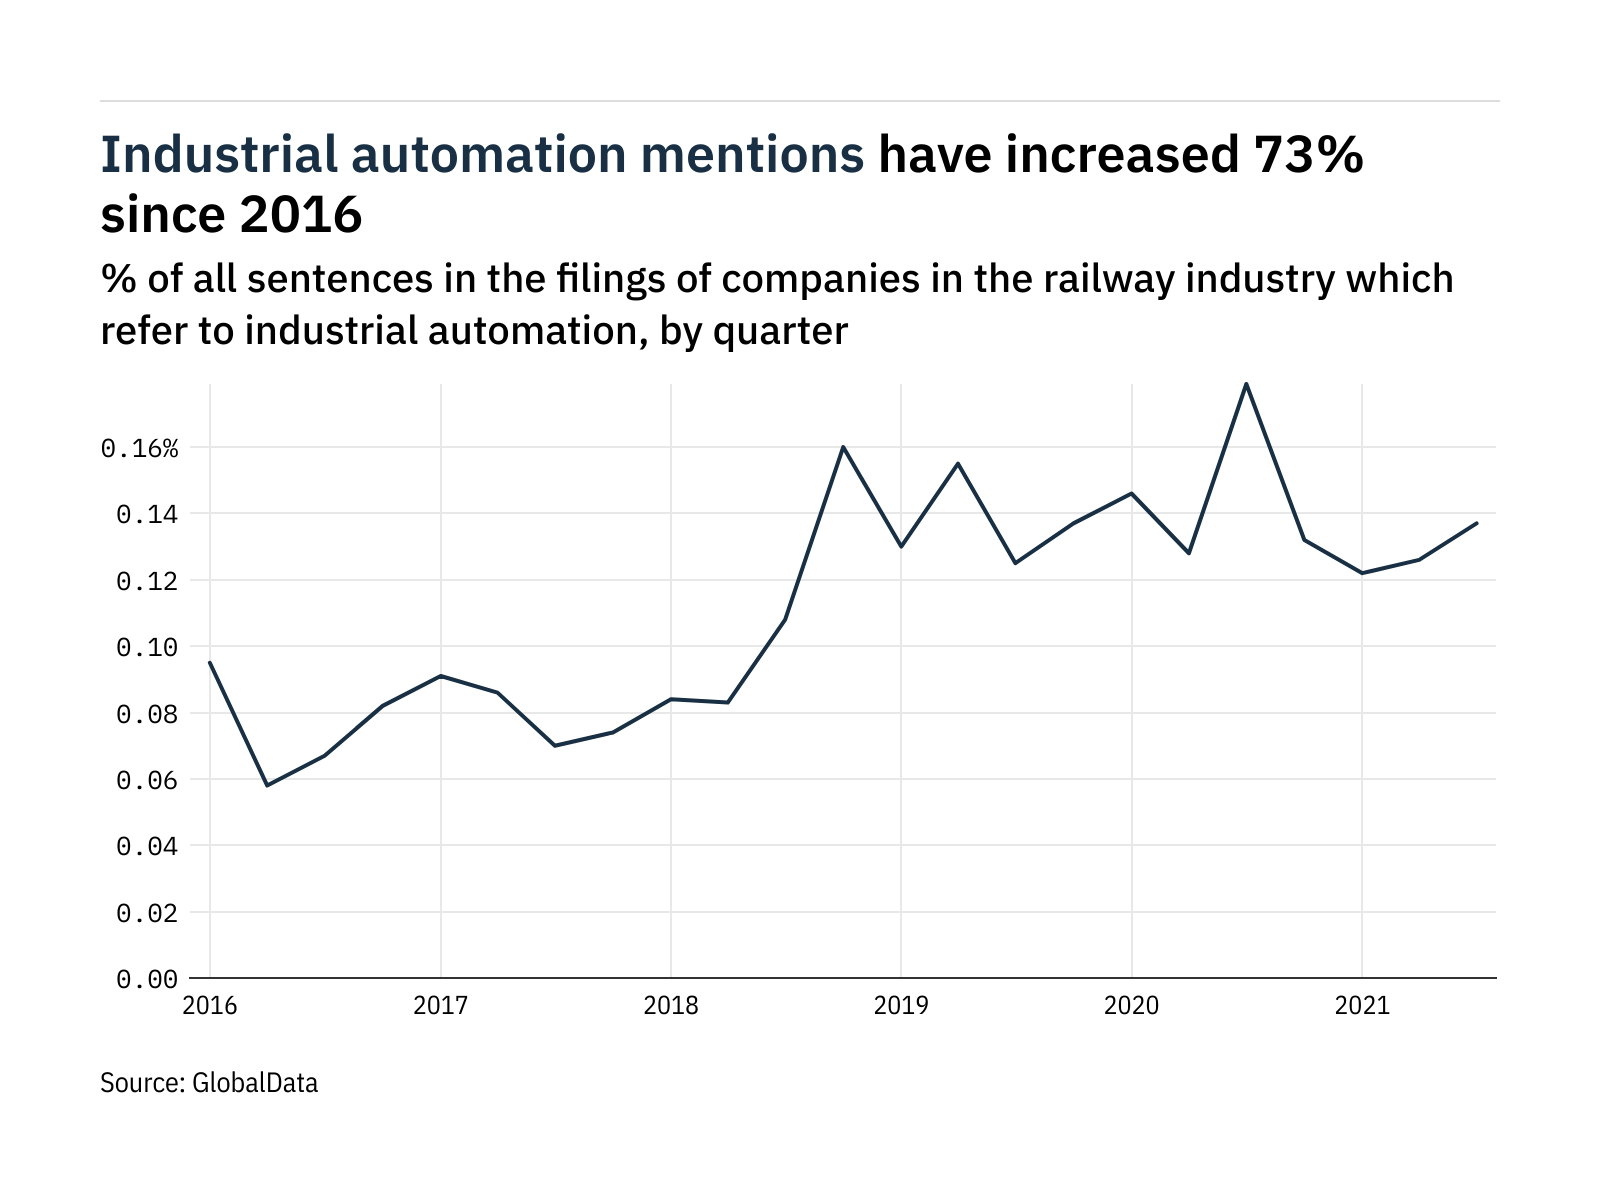 Filings buzz in the railway industry: 23% decrease in industrial automation mentions since Q3 of 2020